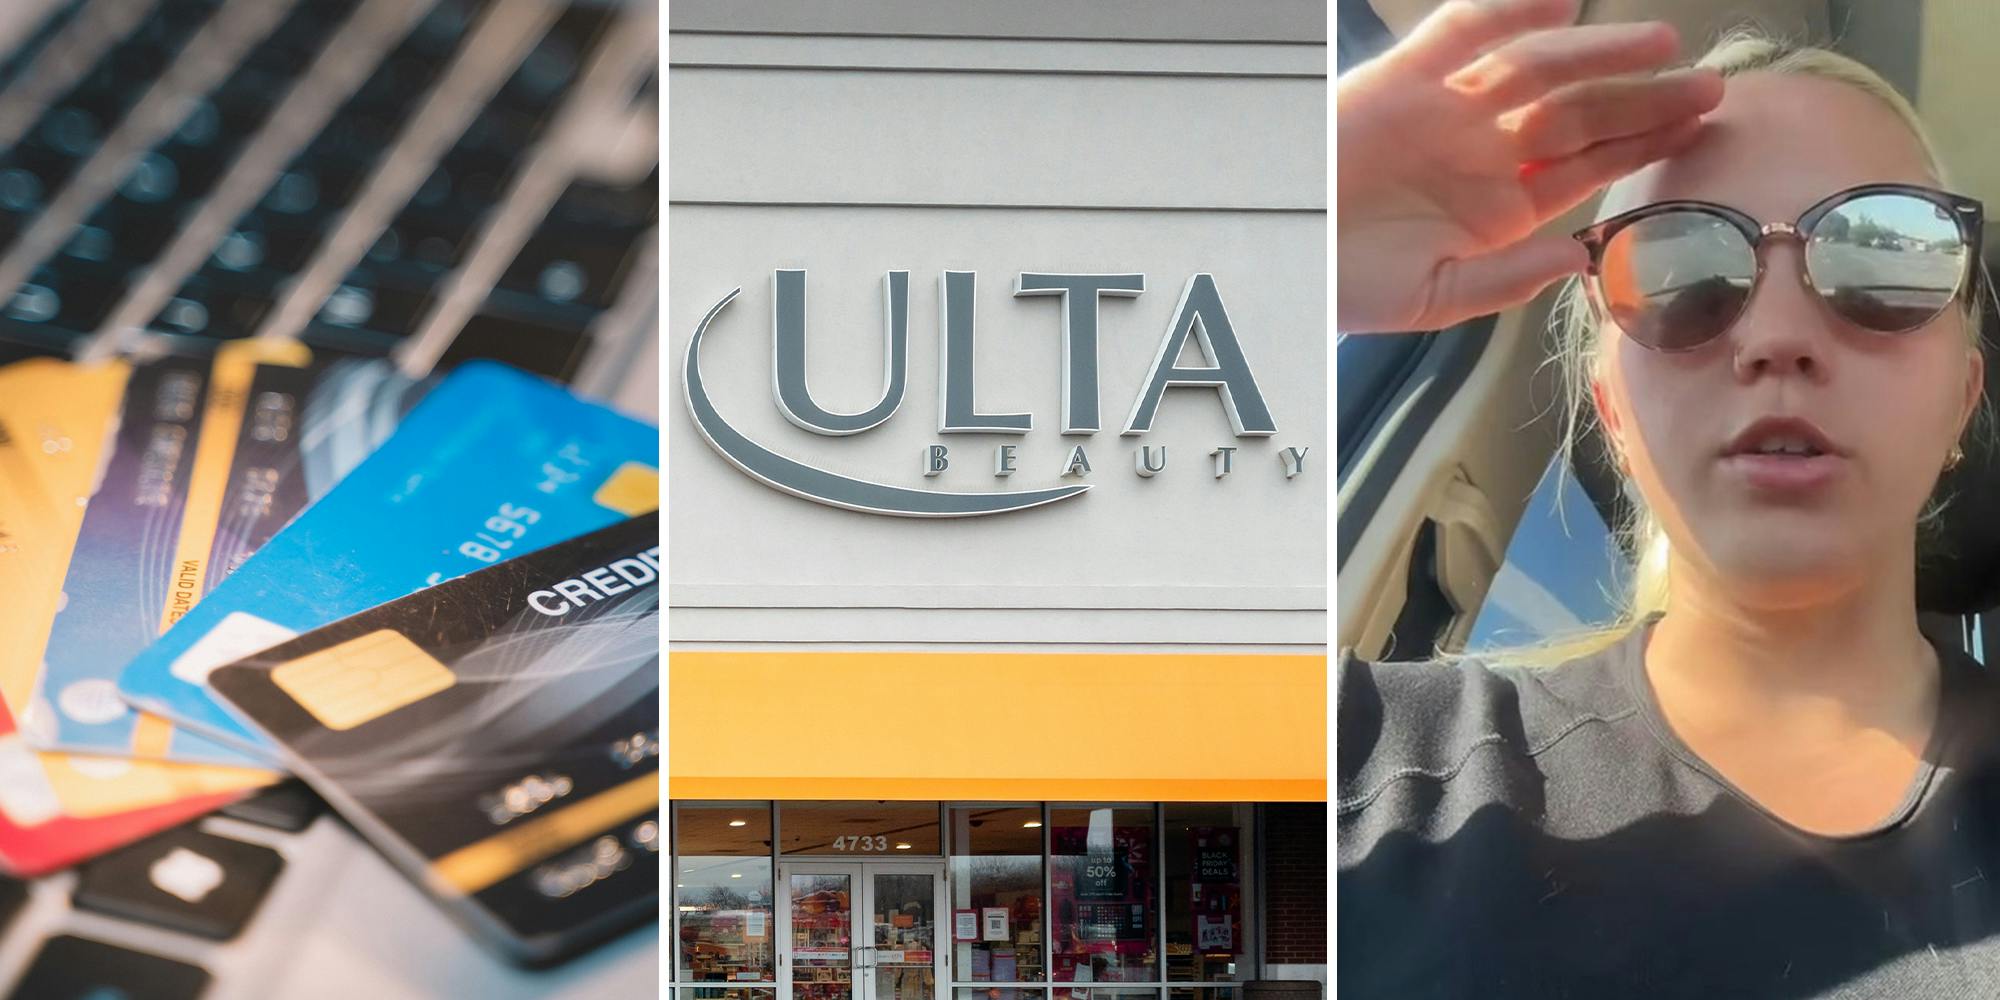 Ulta customer says workers ganged up on her, wouldn’t take no for an answer when trying to get her to sign up for credit card